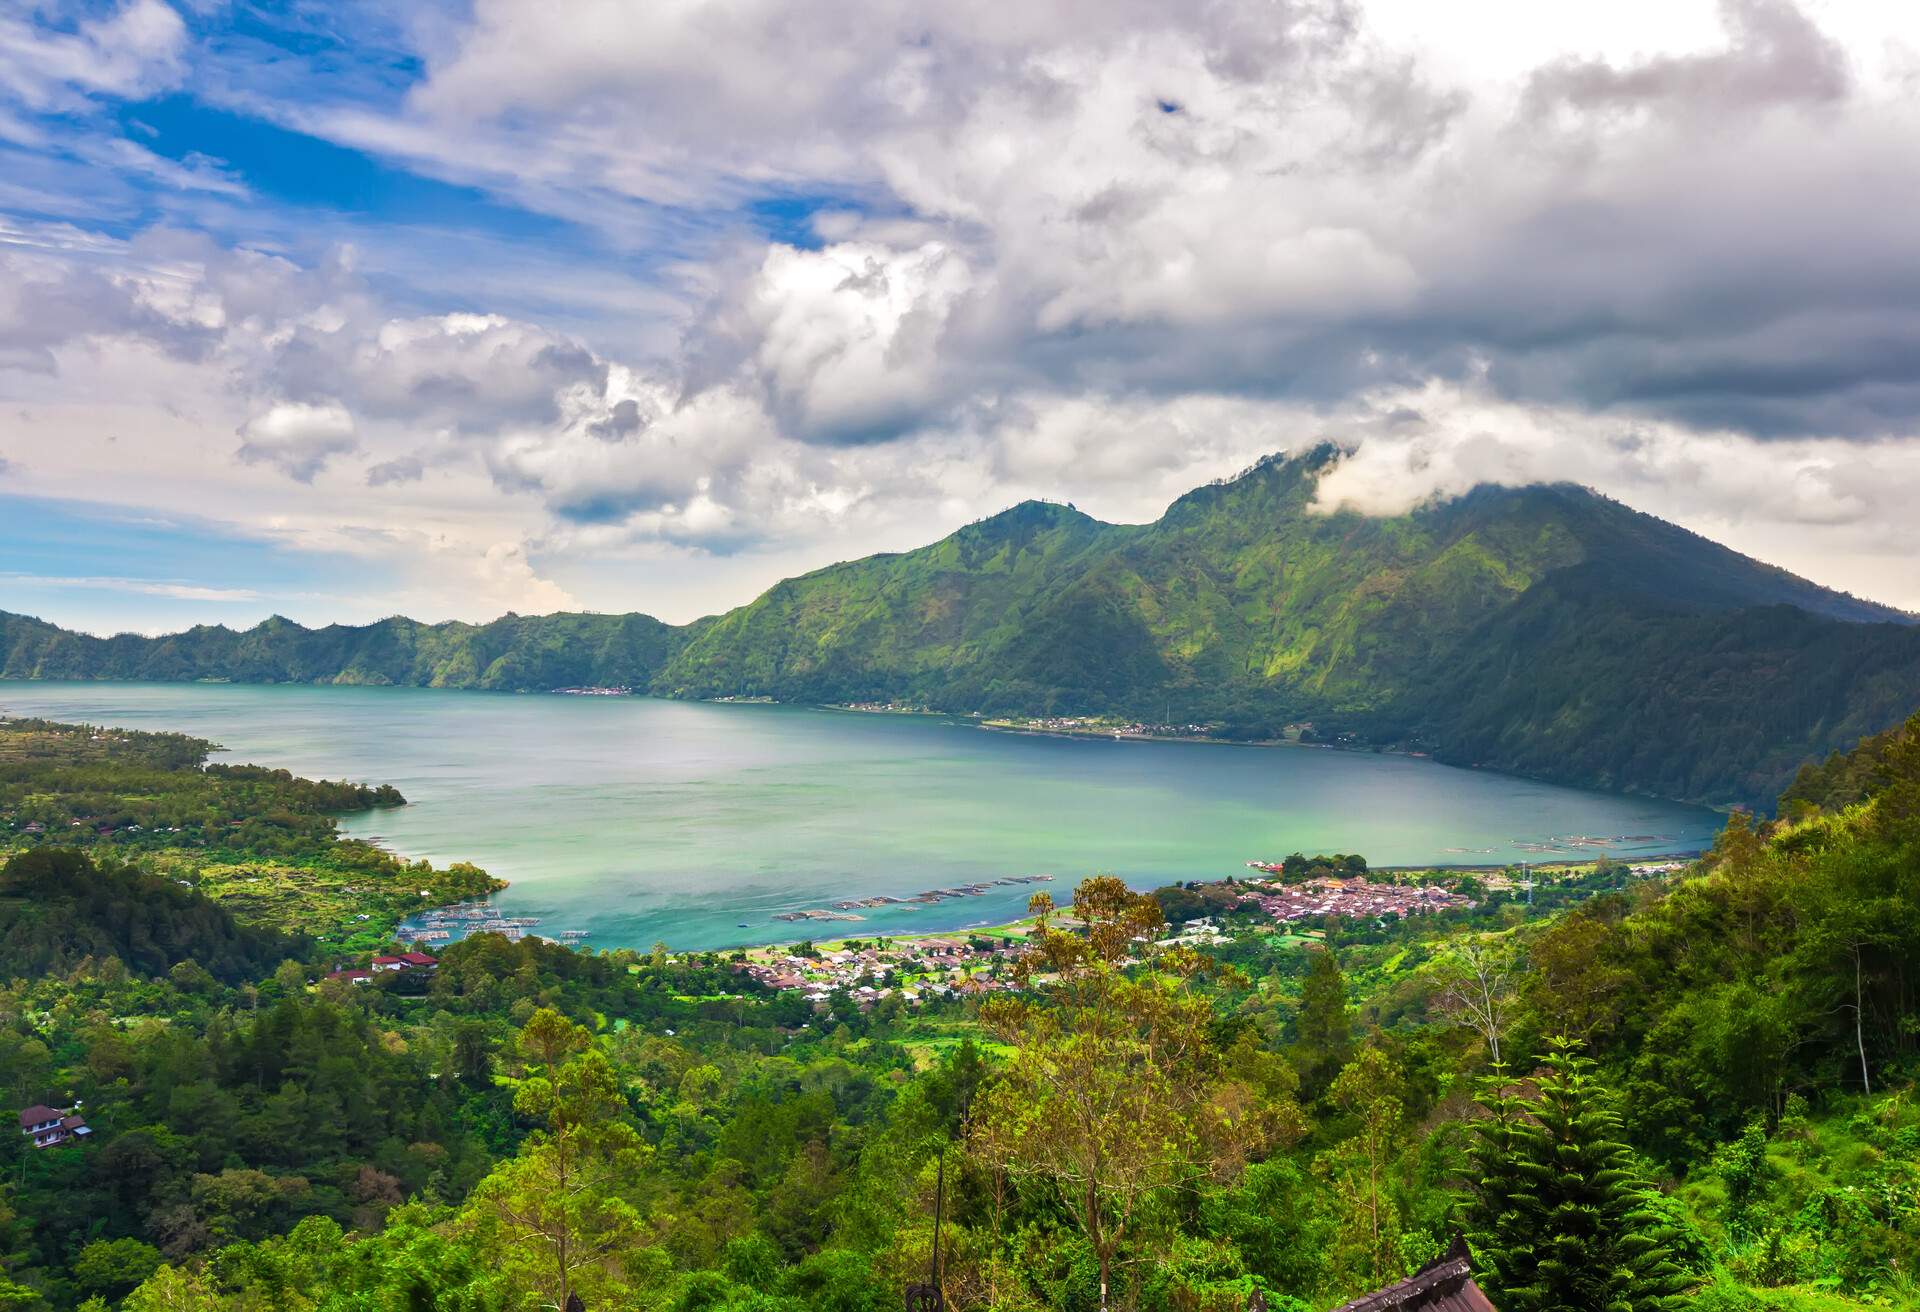 Panoramic view of a lake surrounded by mountain, tropical landscape with colorful clouds in the sky. Danau Batur, Gunung Batur, Kintamani, Bali, Indonesia.